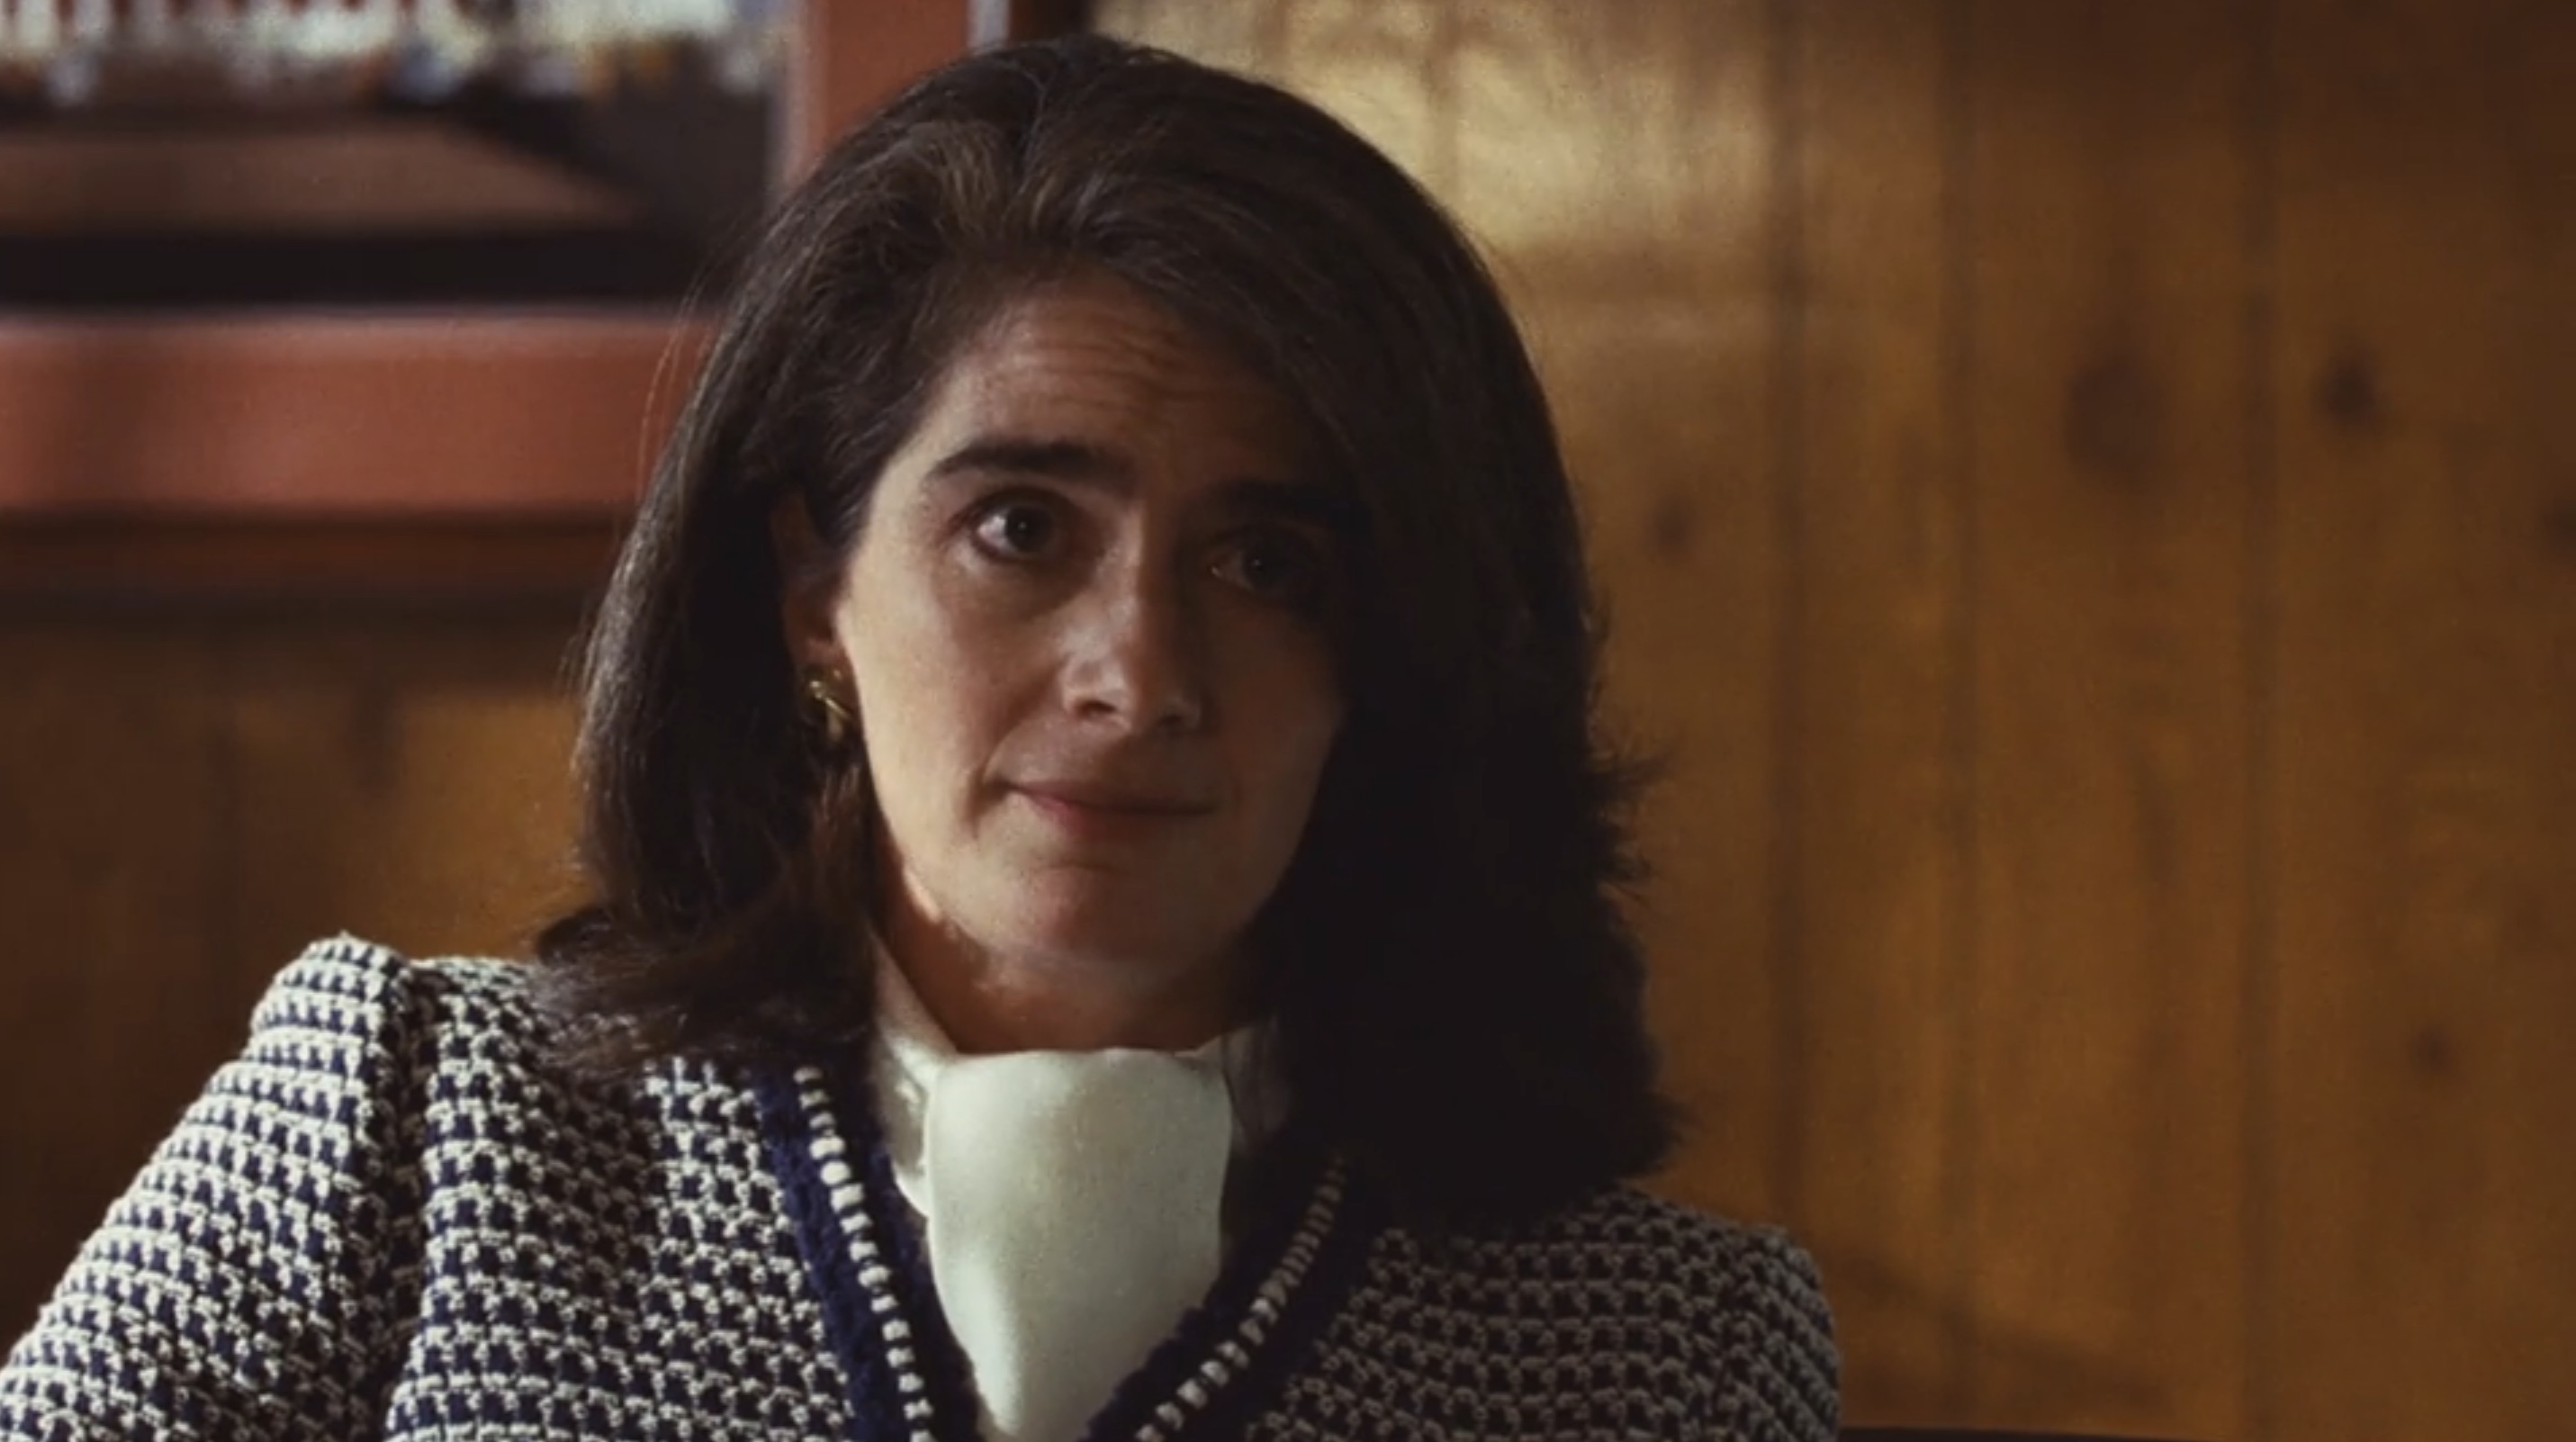 Winning Time Cast on HBO - Gaby Hoffmann as Claire Rothman